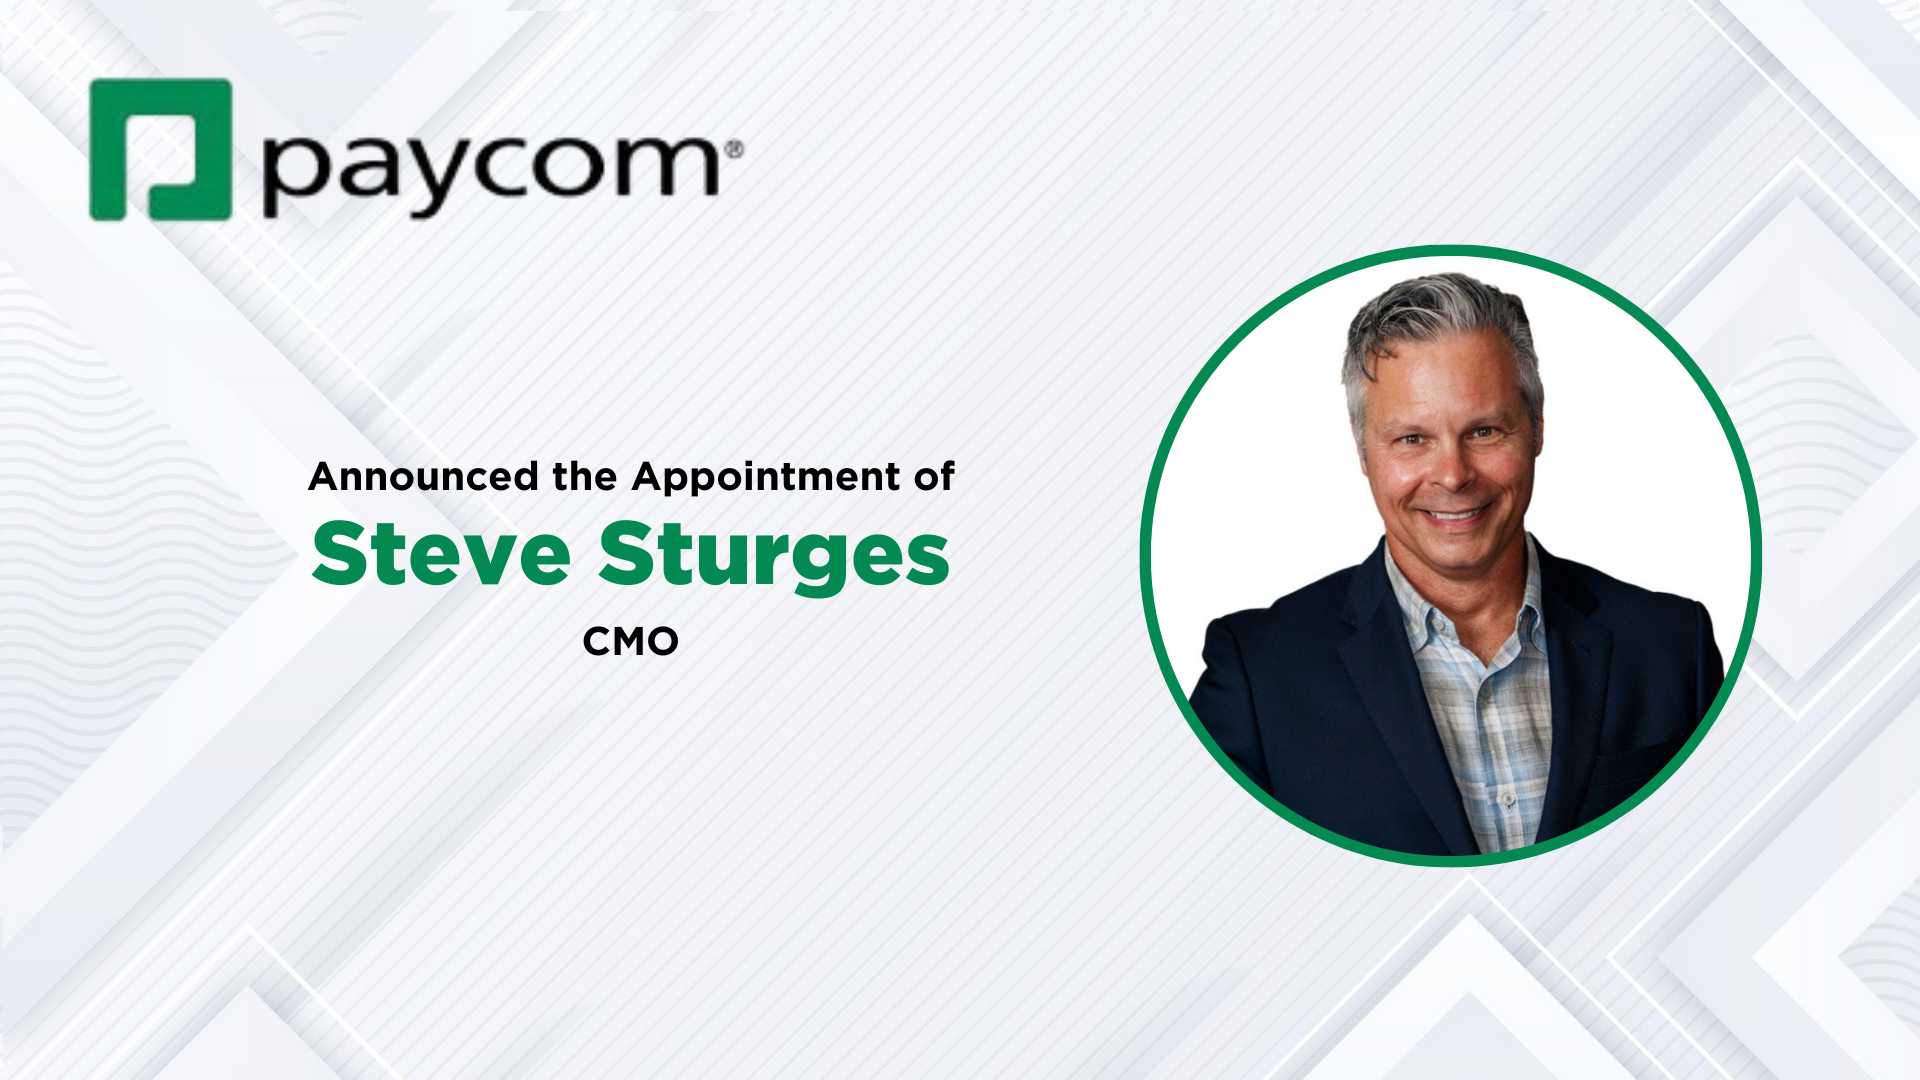 Paycom Appoints Steve Sturges as Chief Marketing Officer